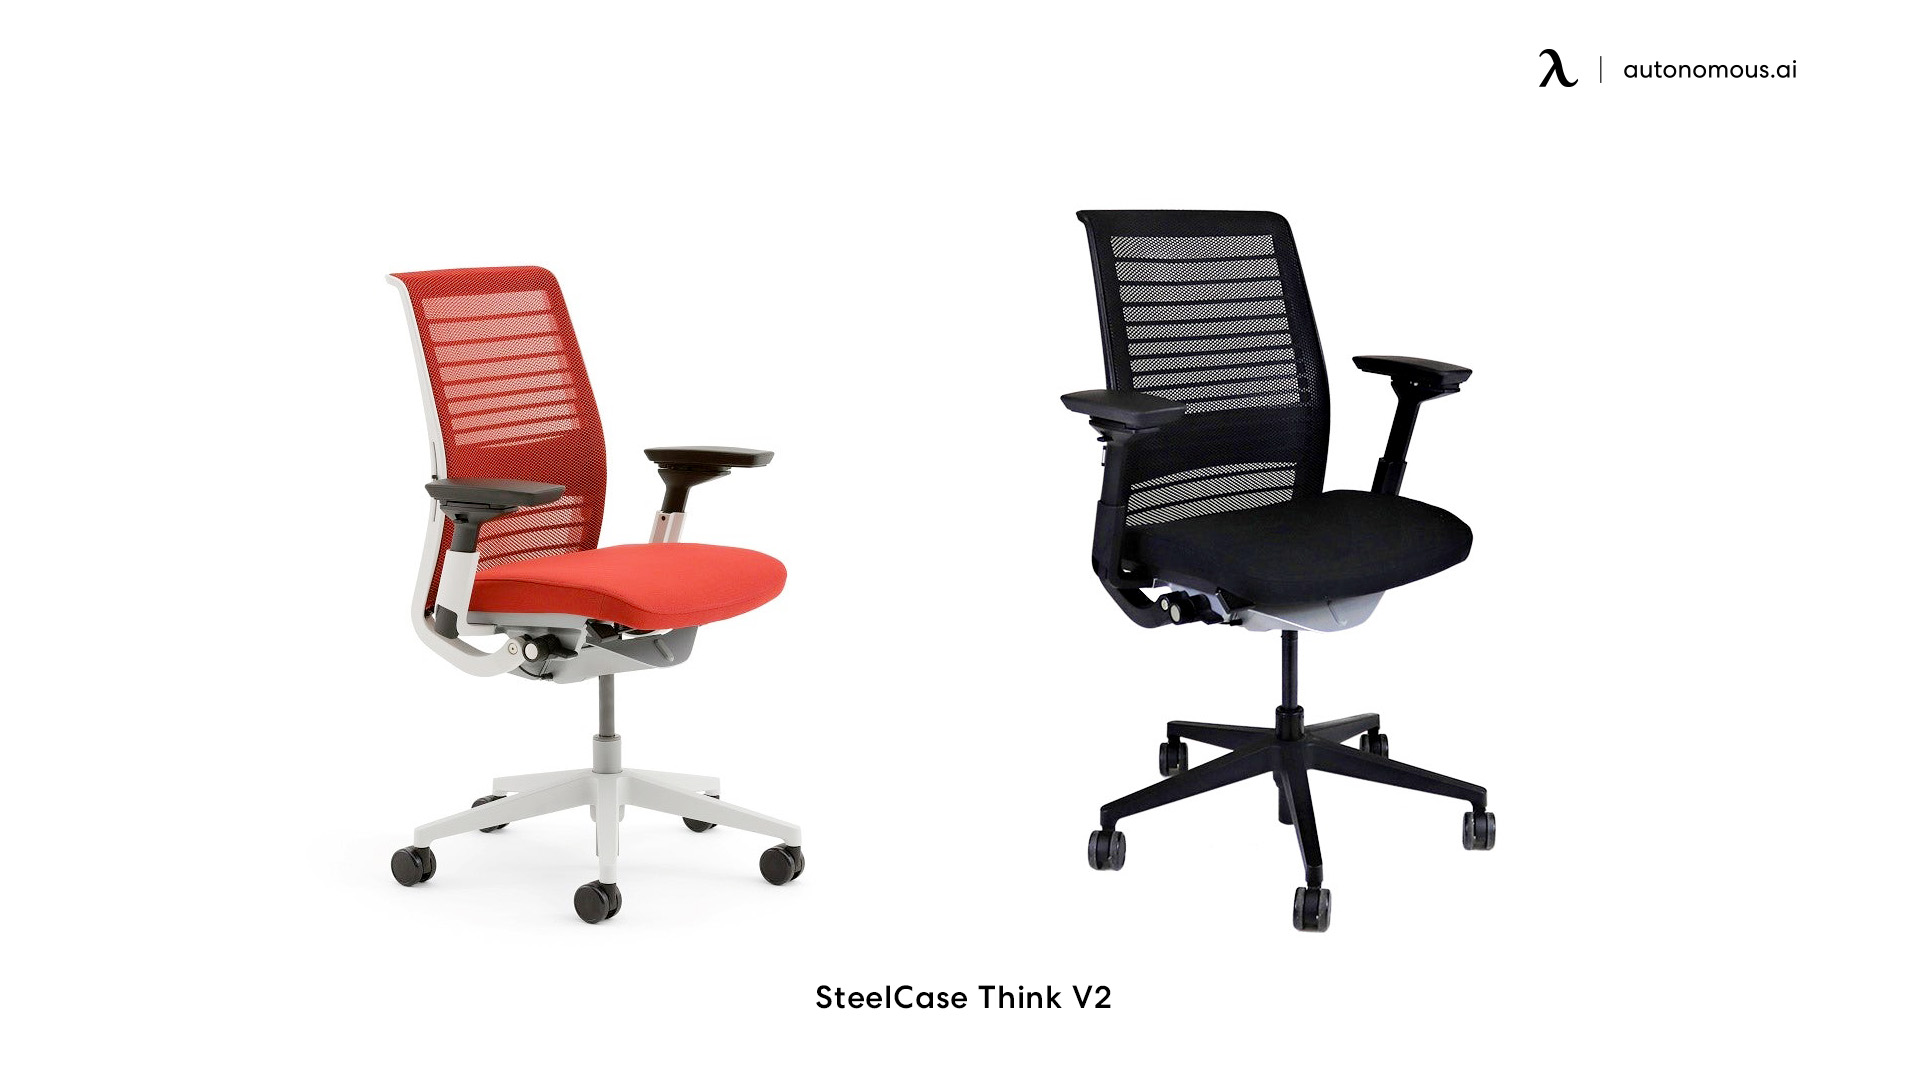 SteelCase Think V2 modern office chair